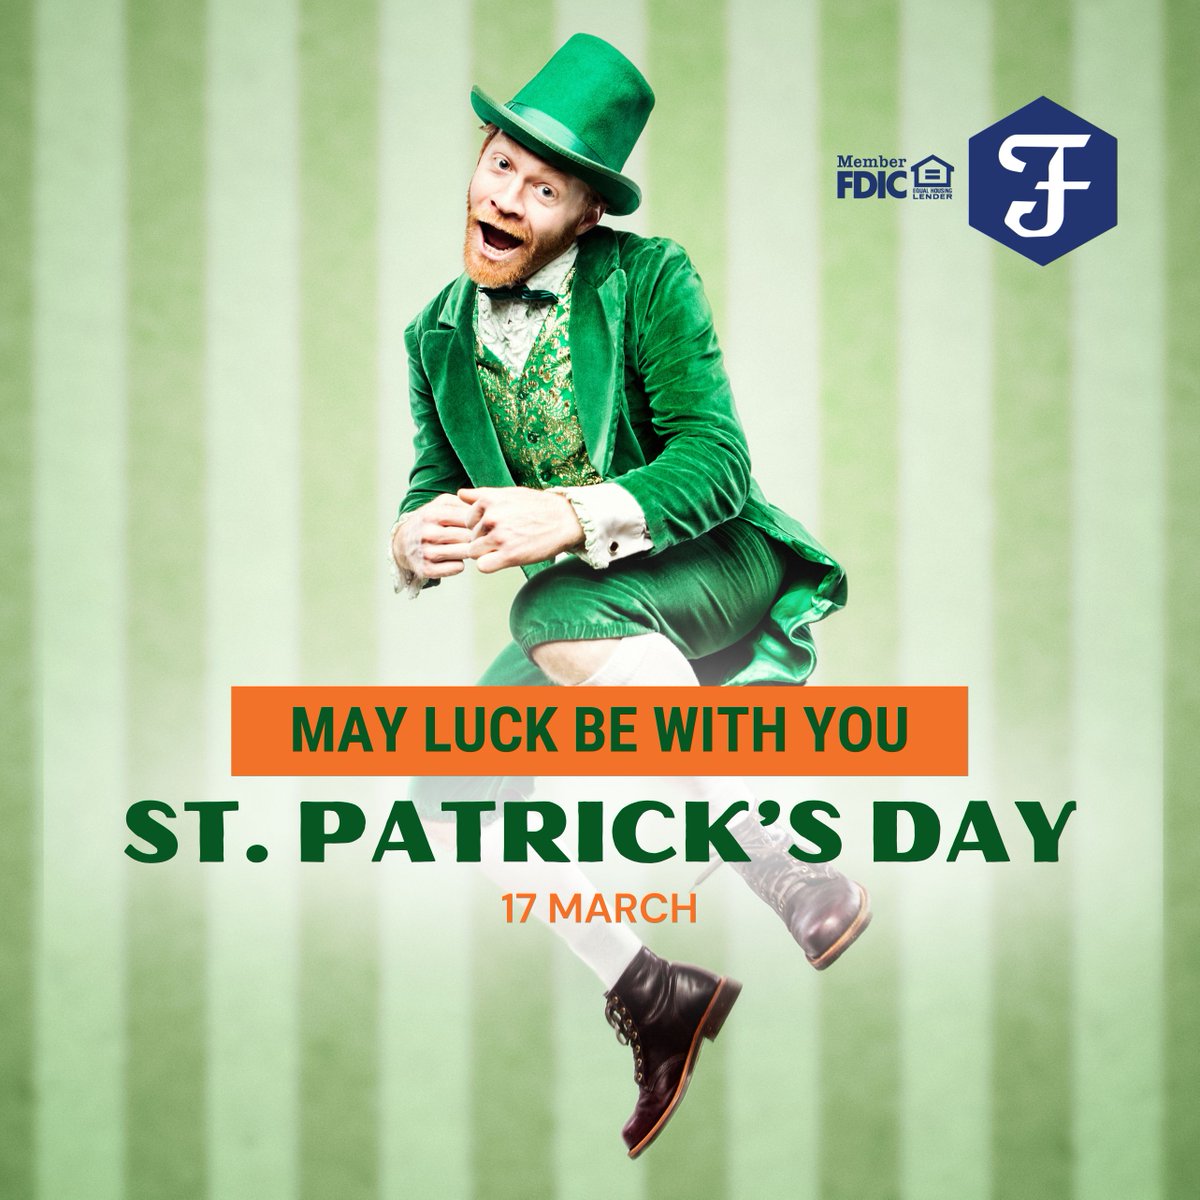 🍀 Wishing you a pot of gold's worth of luck on this St. Patrick's Day! 🌈 #StPatricksDay #LuckofTheIrish